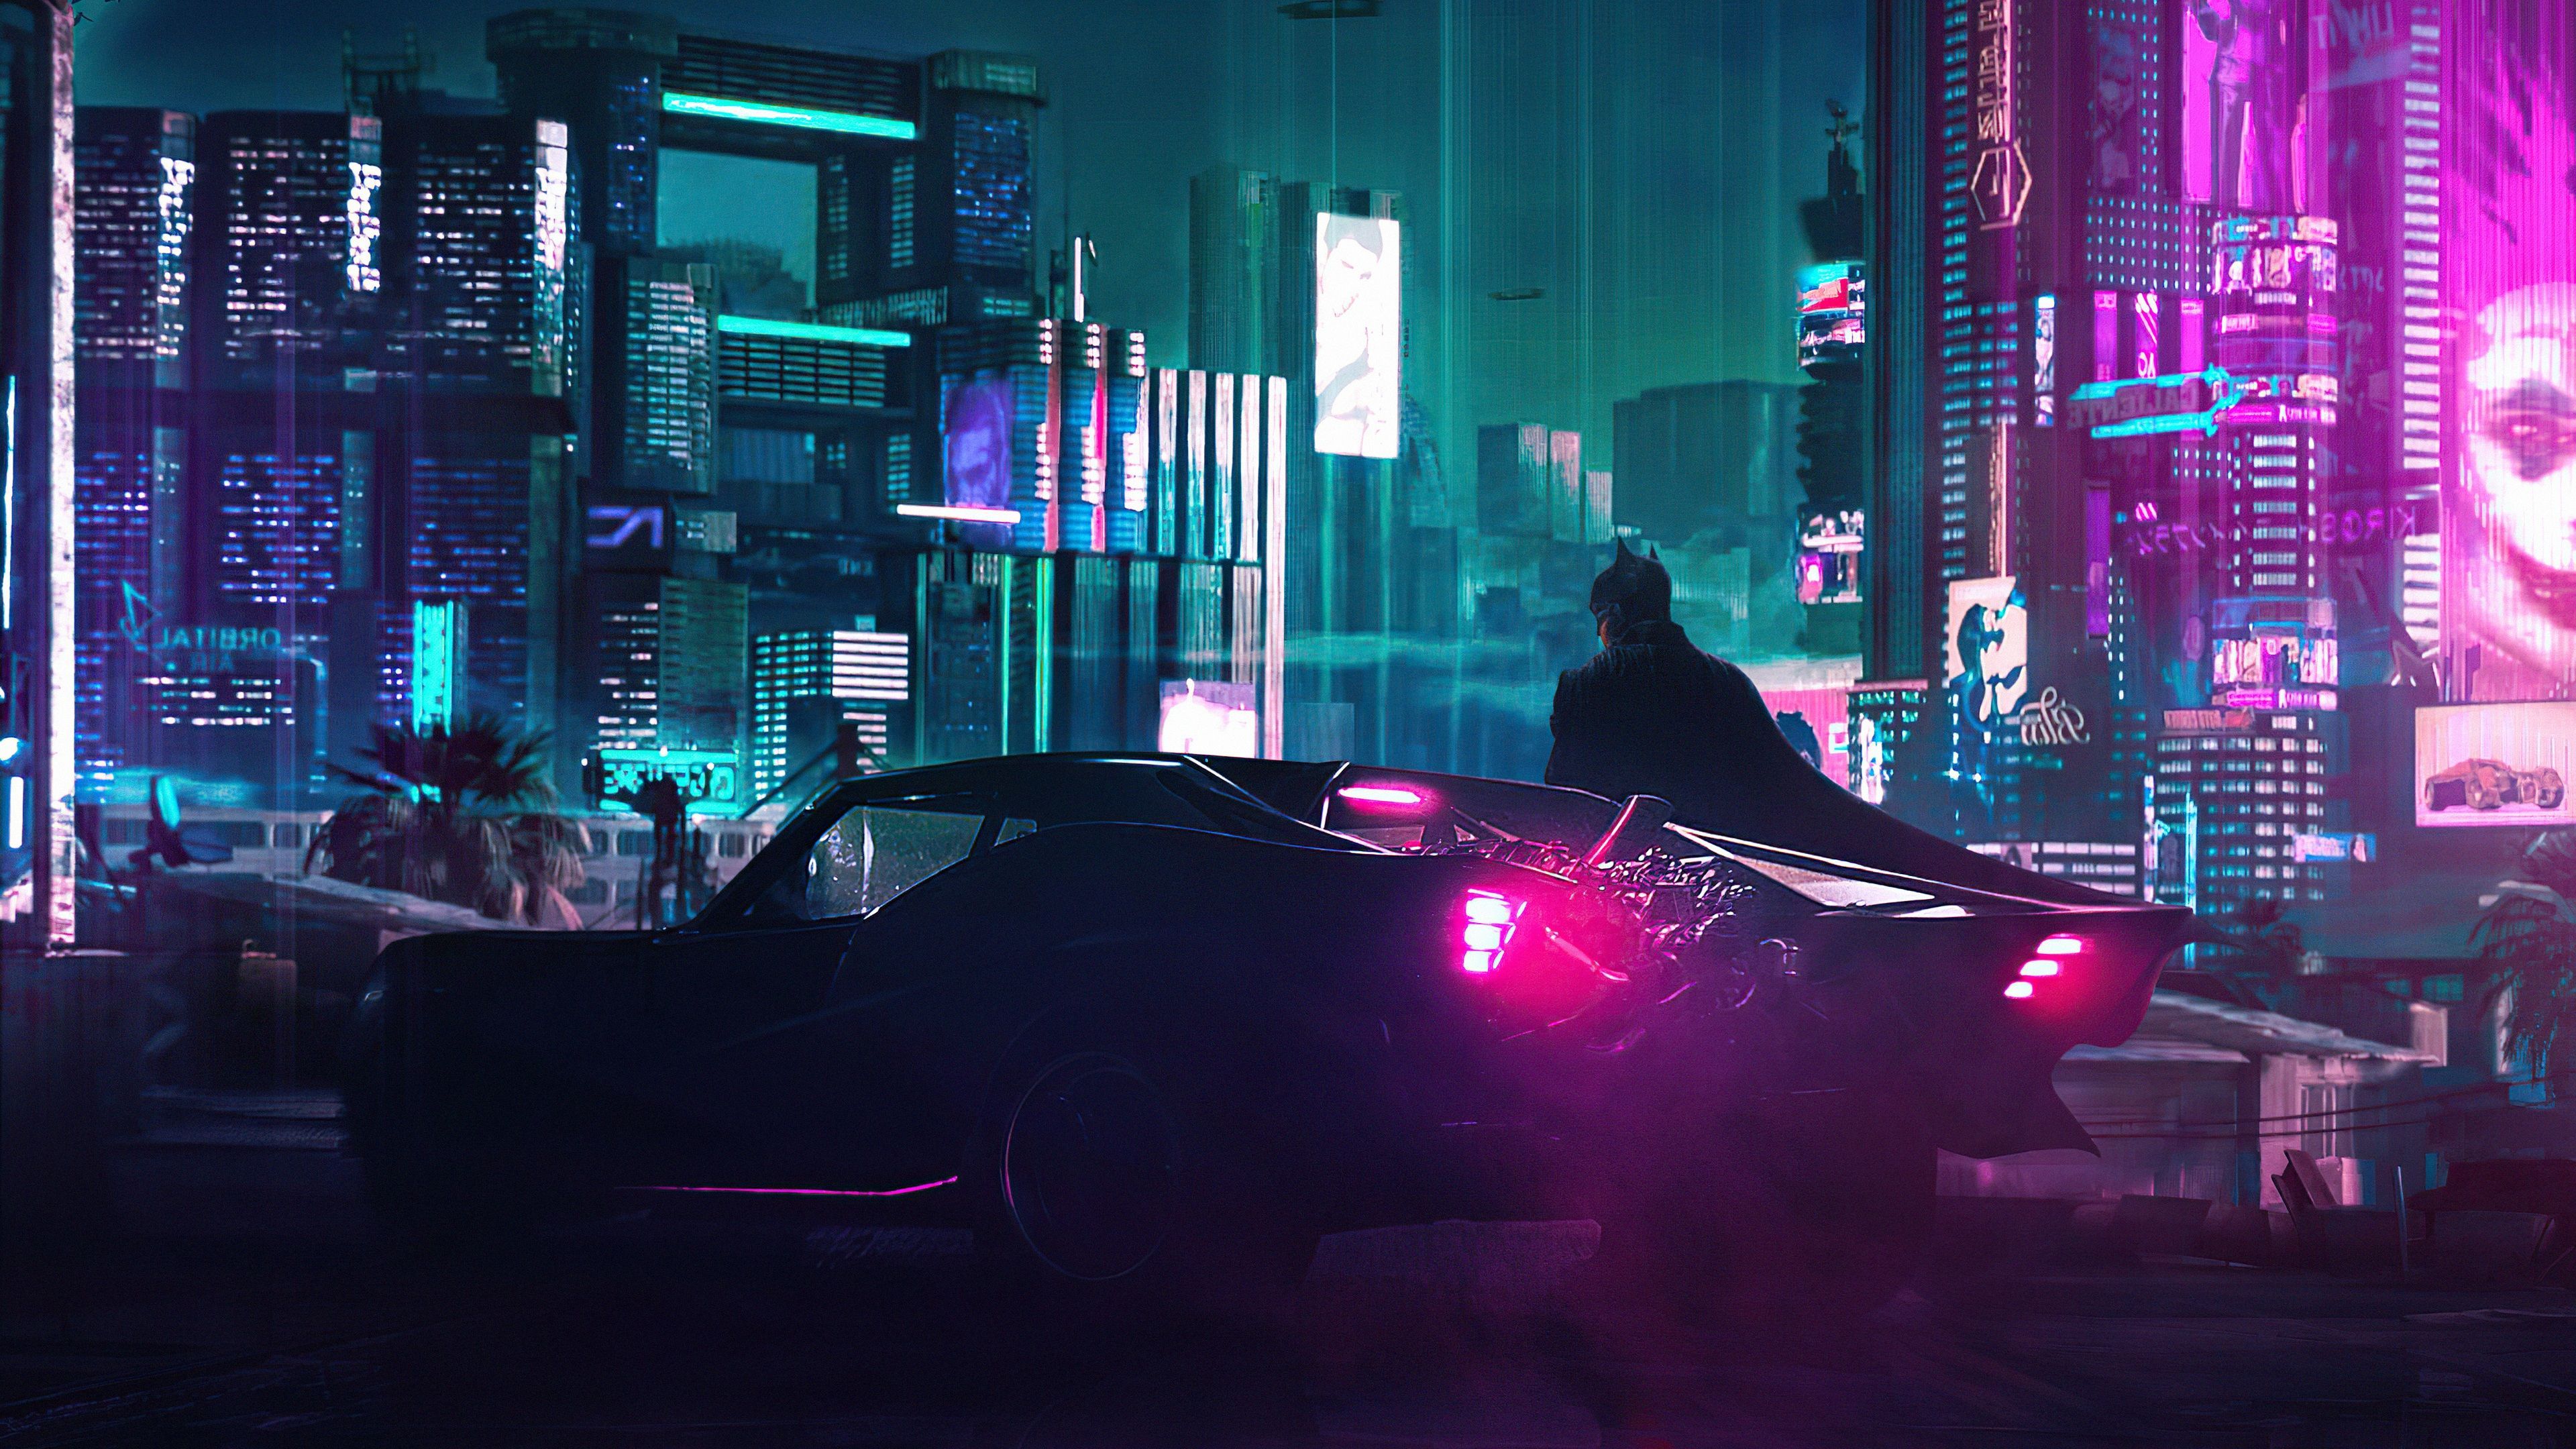 A man standing in front of an animated city - Cyberpunk